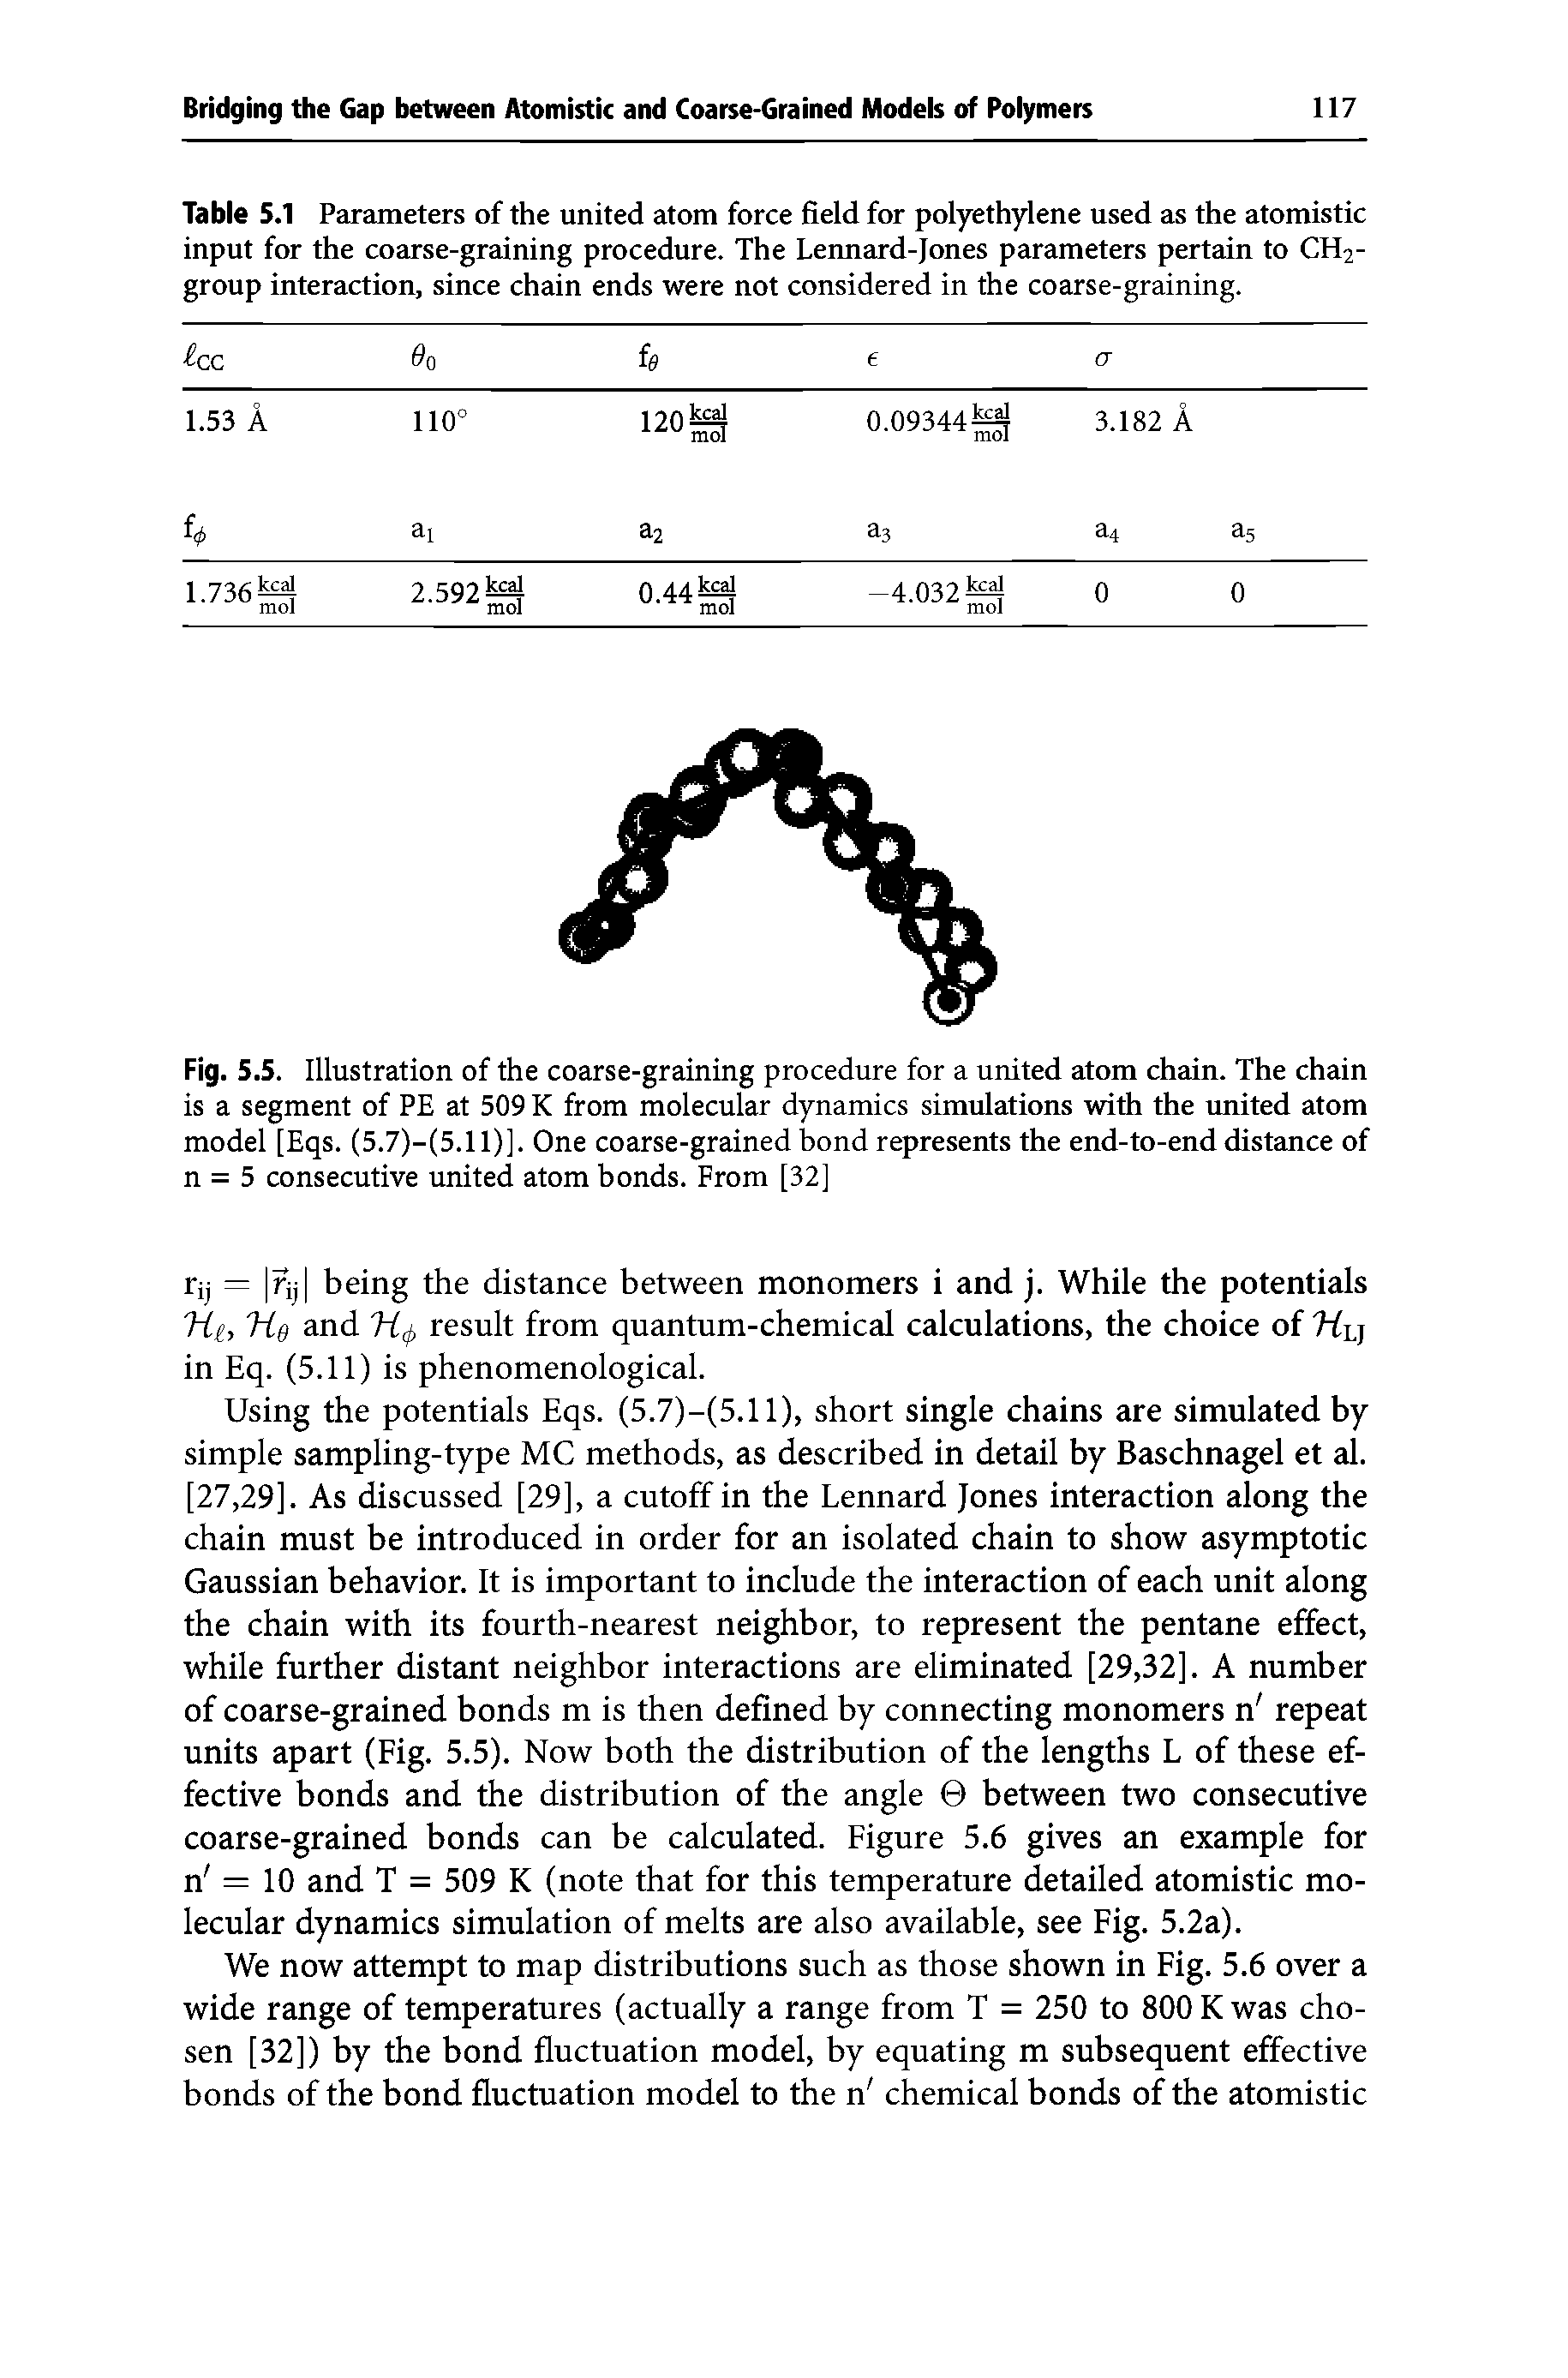 Fig. 5.5. Illustration of the coarse-graining procedure for a united atom chain. The chain is a segment of PE at 509 K from molecular dynamics simulations with the united atom model [Eqs. (5.7)—(5.11)]. One coarse-grained bond represents the end-to-end distance of n = 5 consecutive united atom bonds. From [32]...